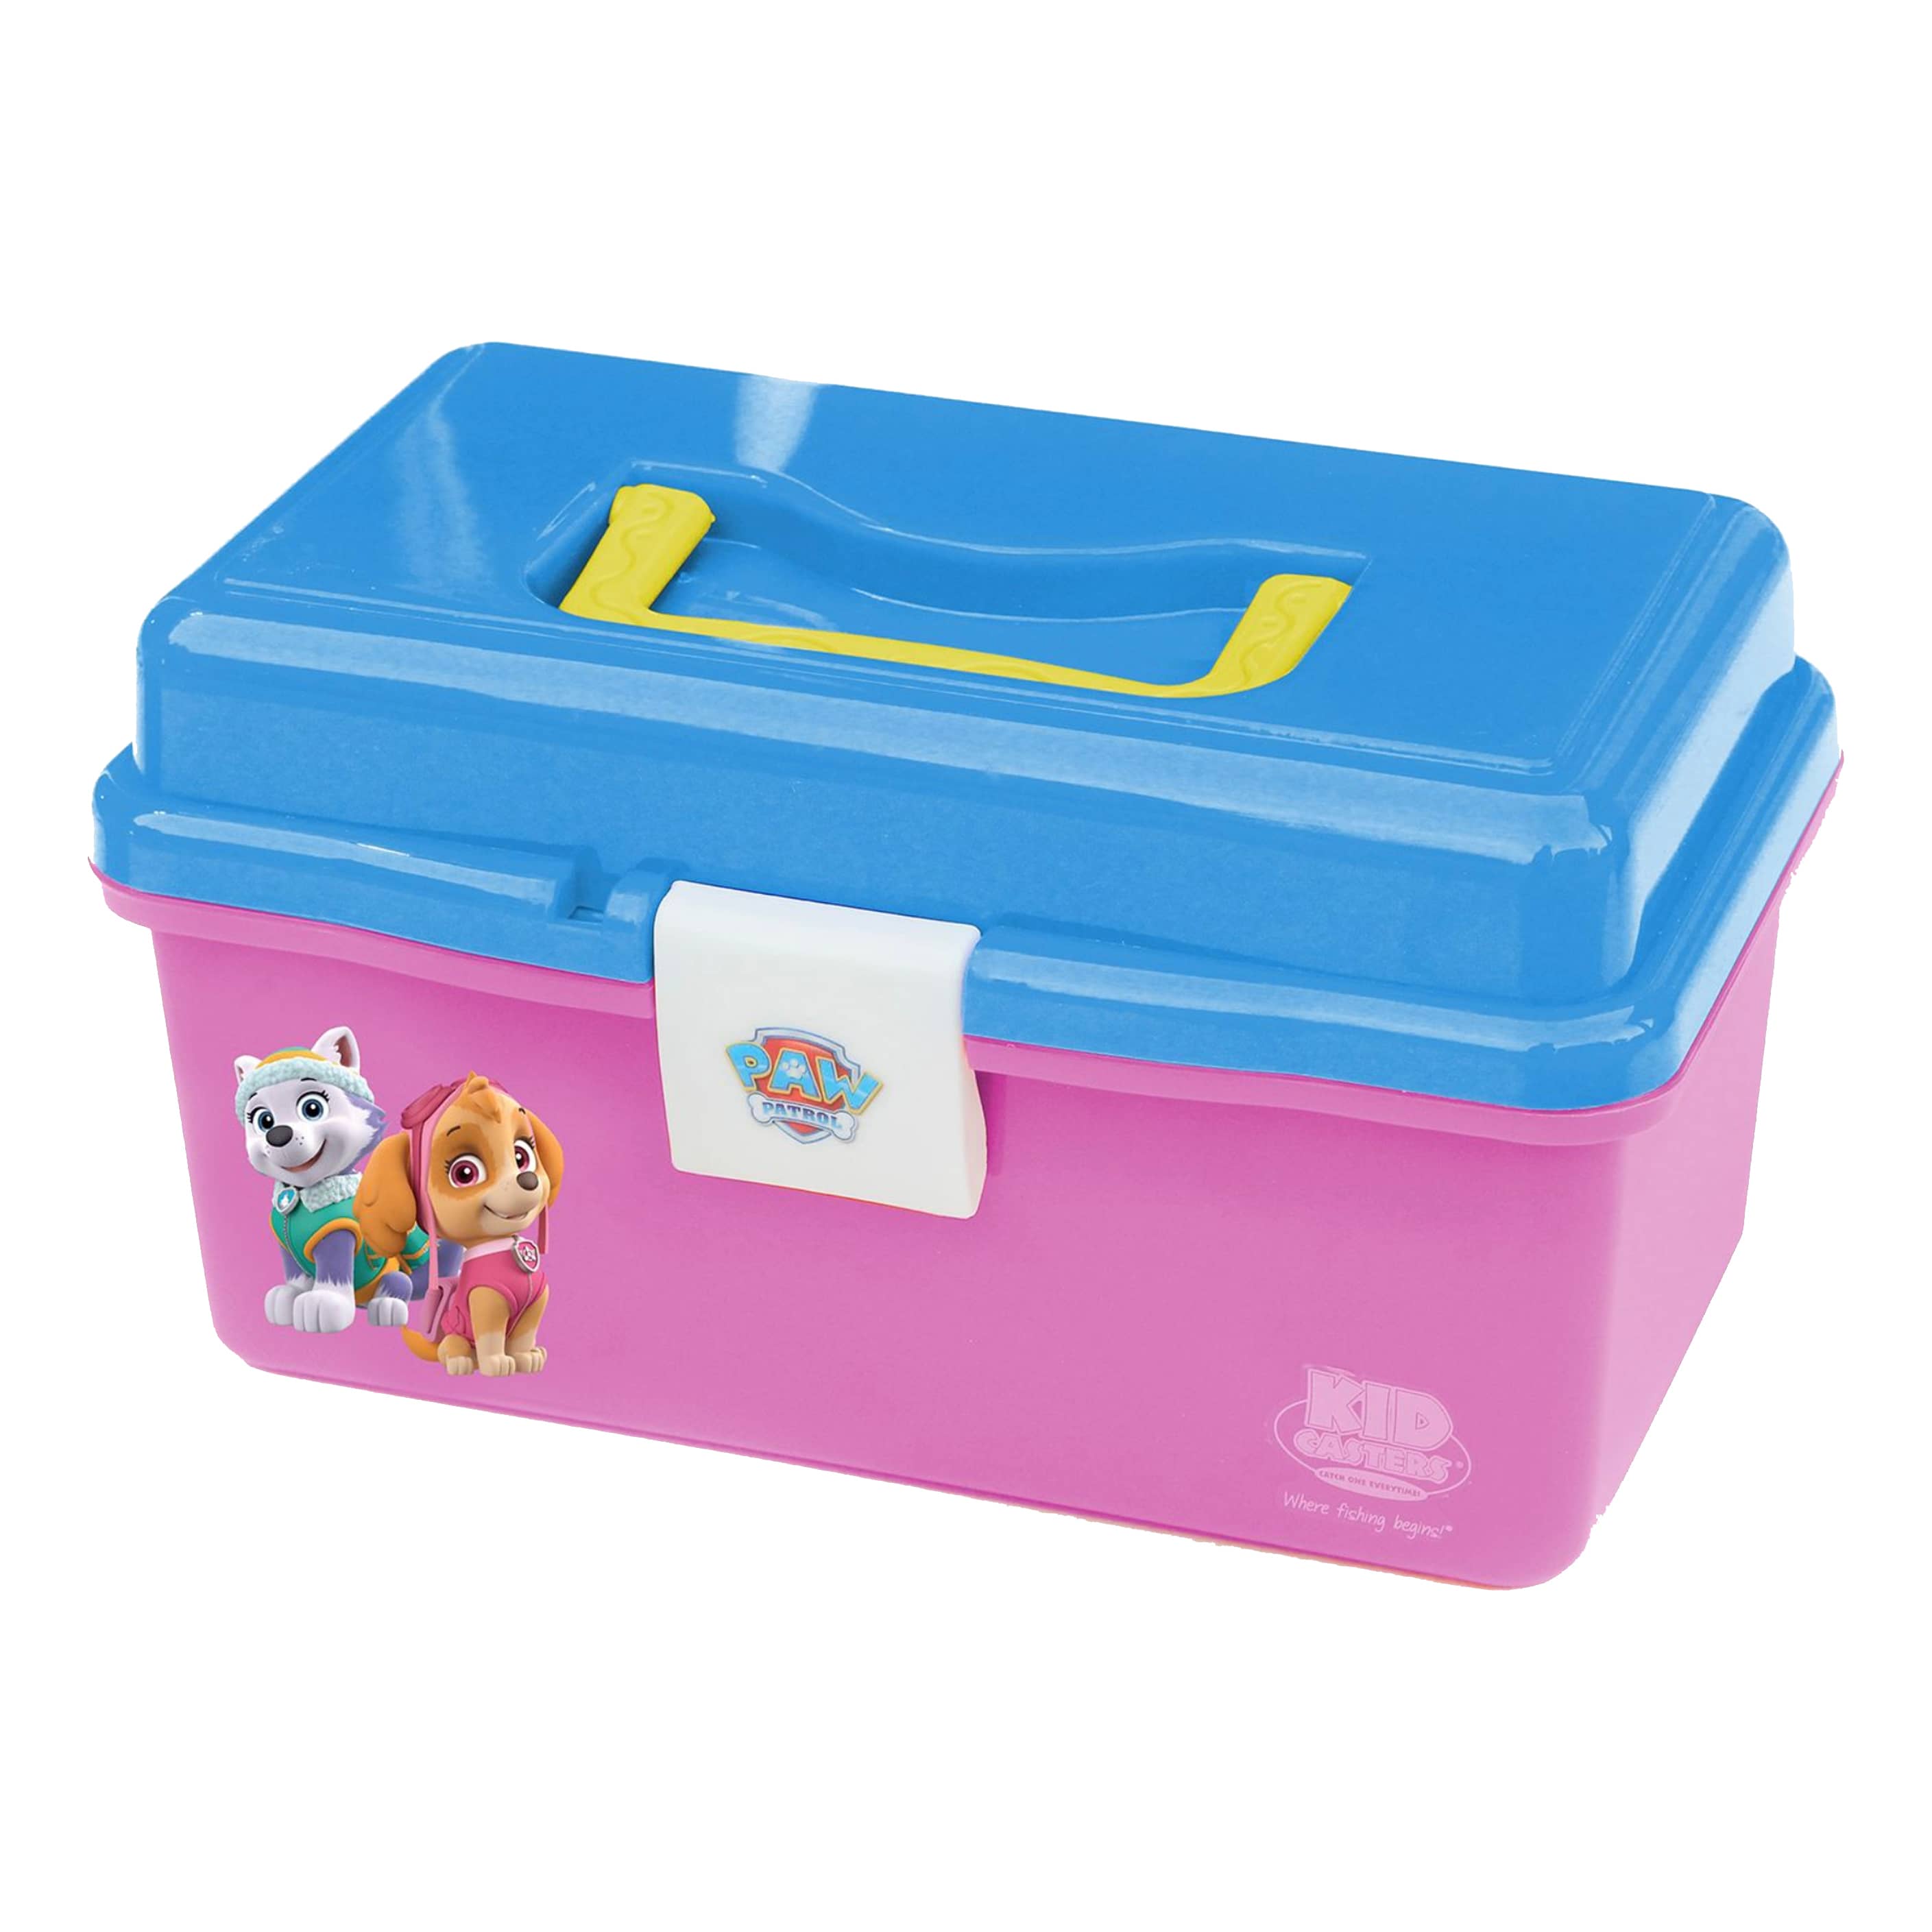 Kid Casters PAW Patrol Tackle Box for Kids - Pink/Turquoise